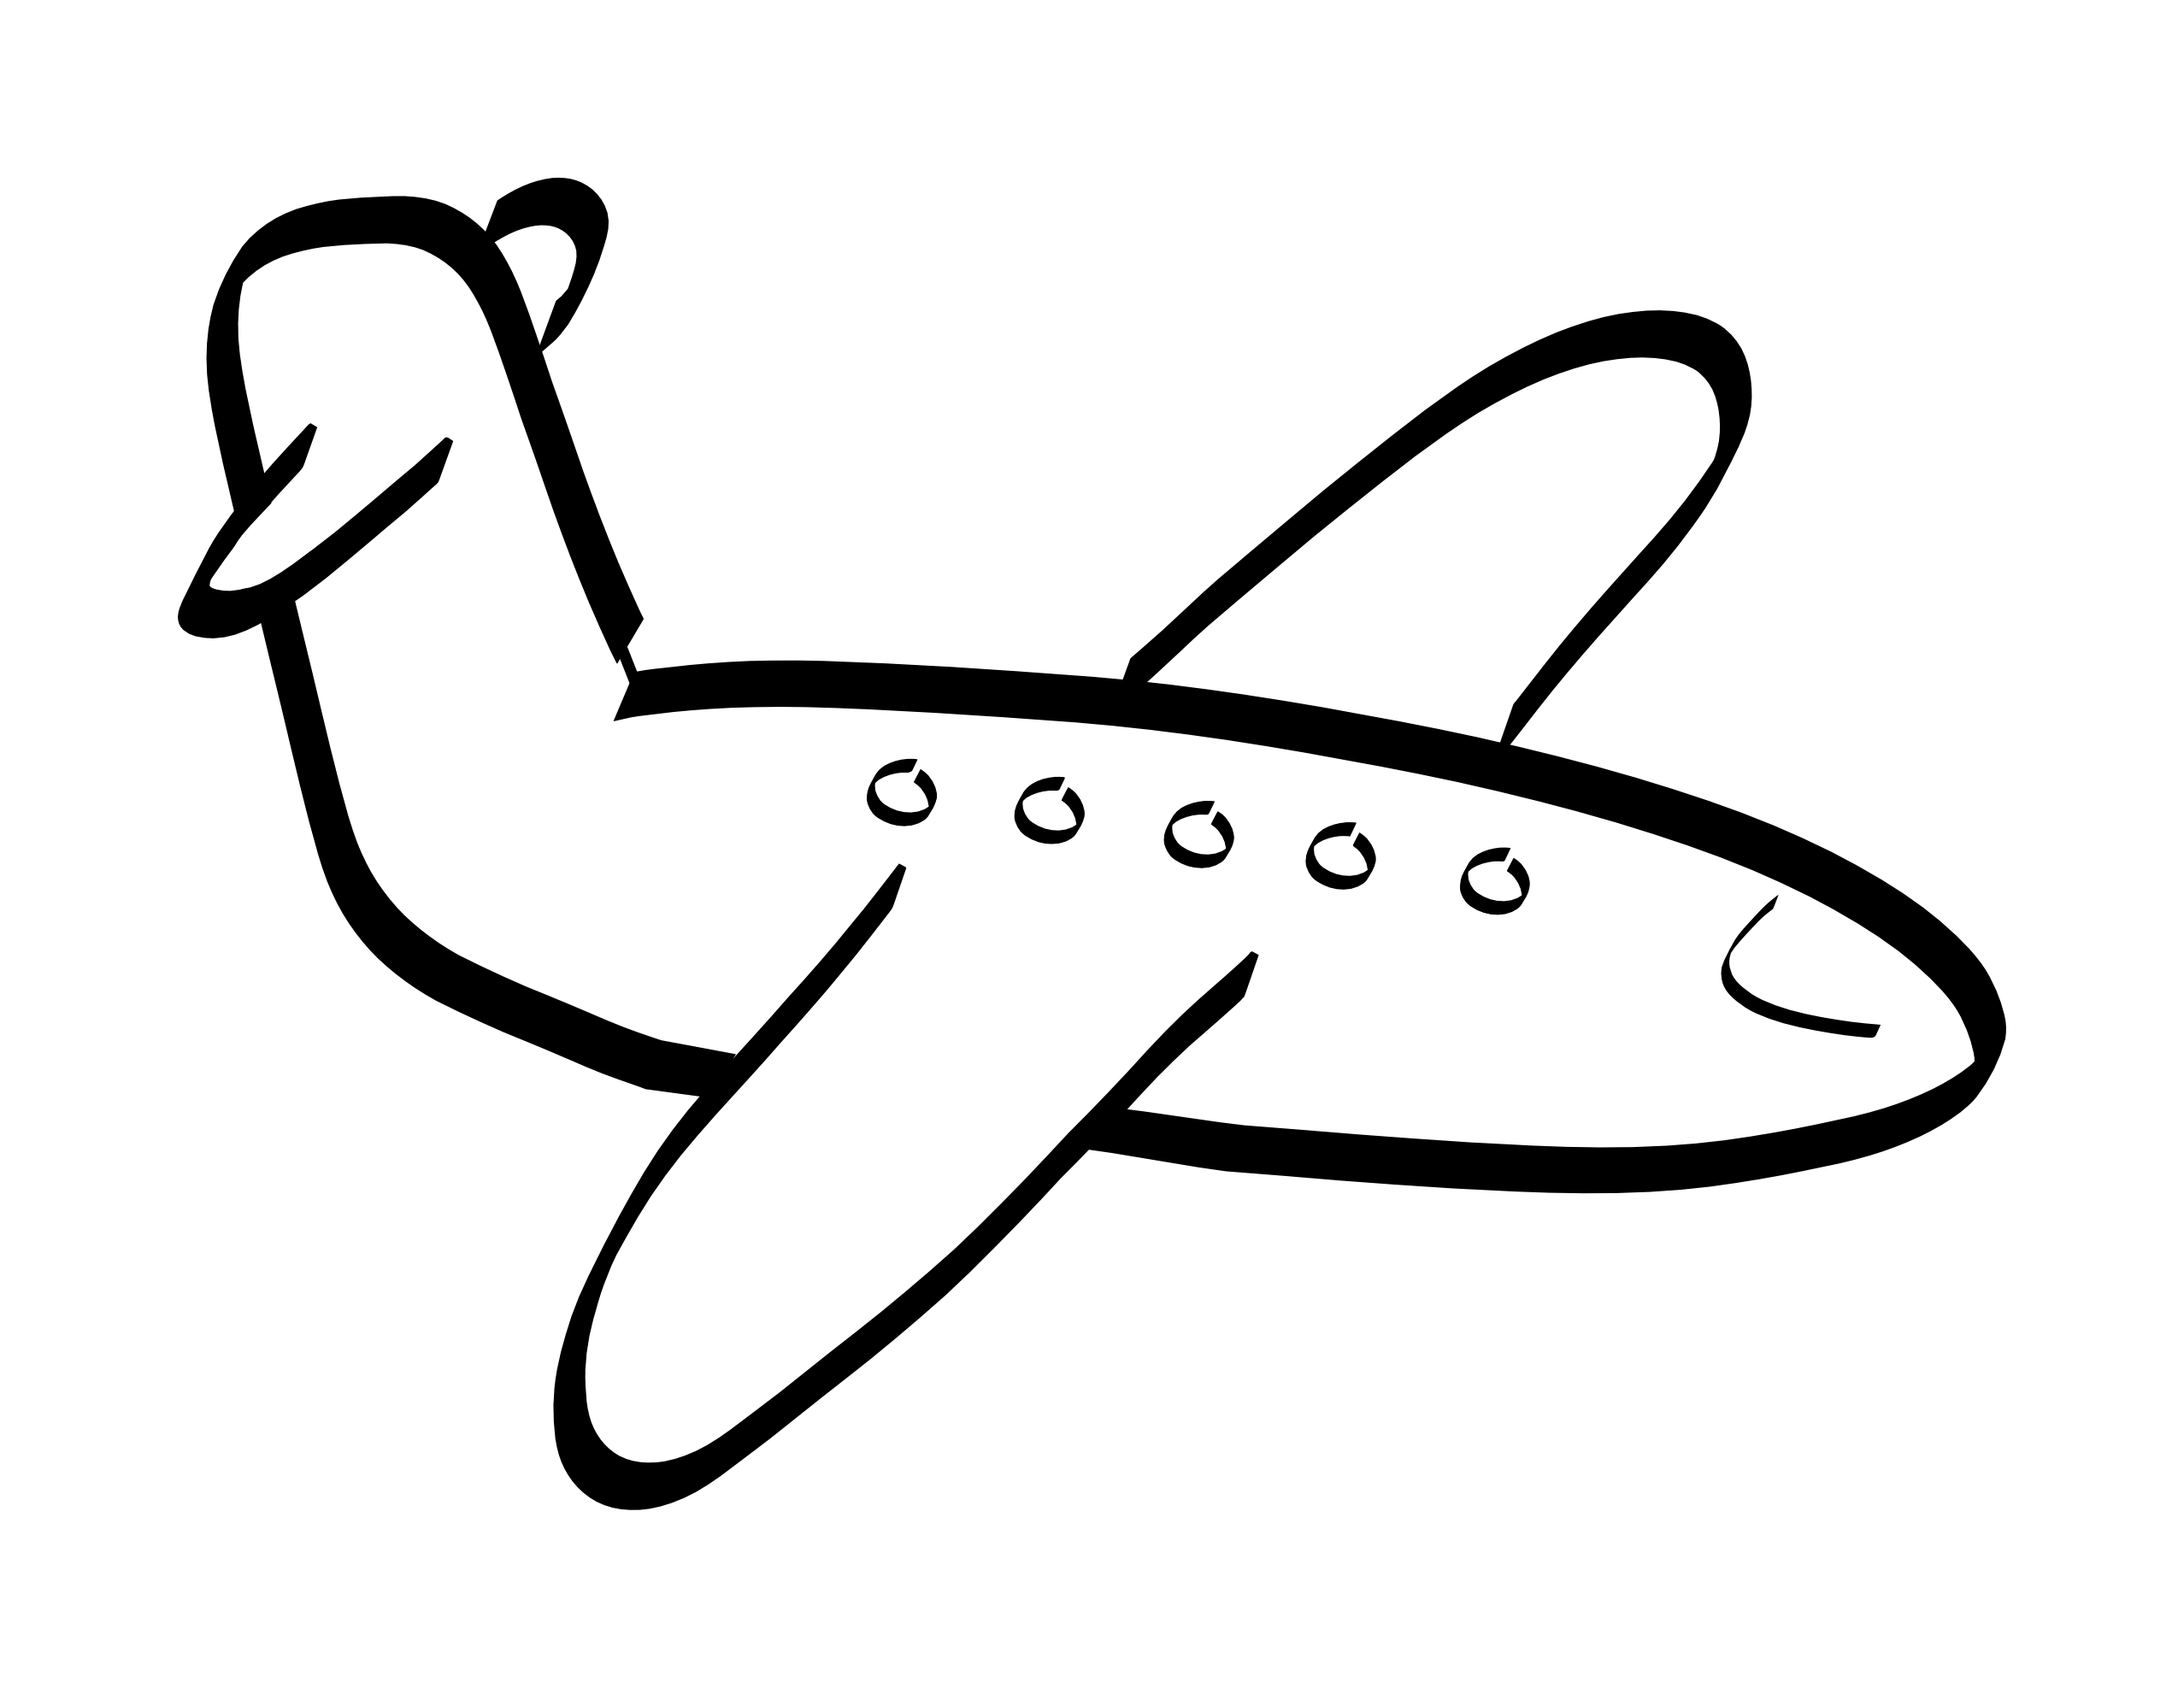 Jet Clipart Black And White - Black And White, Transparent background PNG HD thumbnail